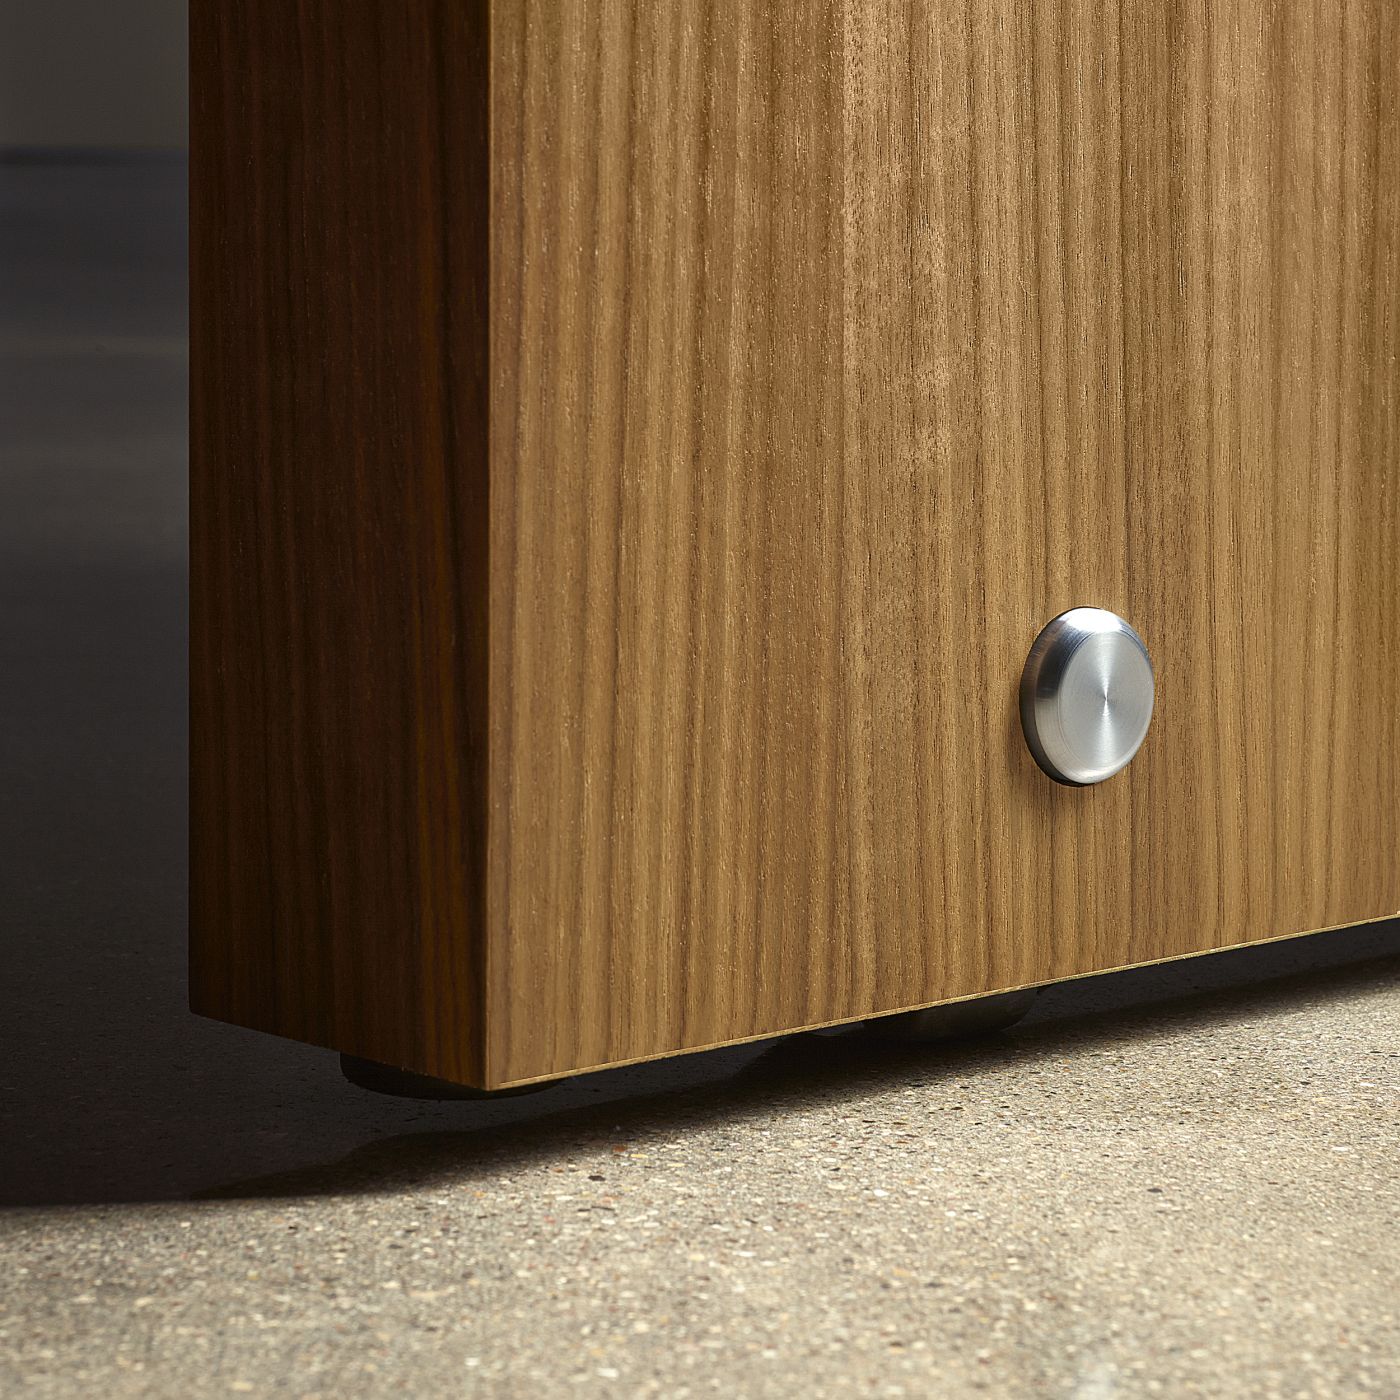 Stainless steel pins subtly express innovative, integral casters.